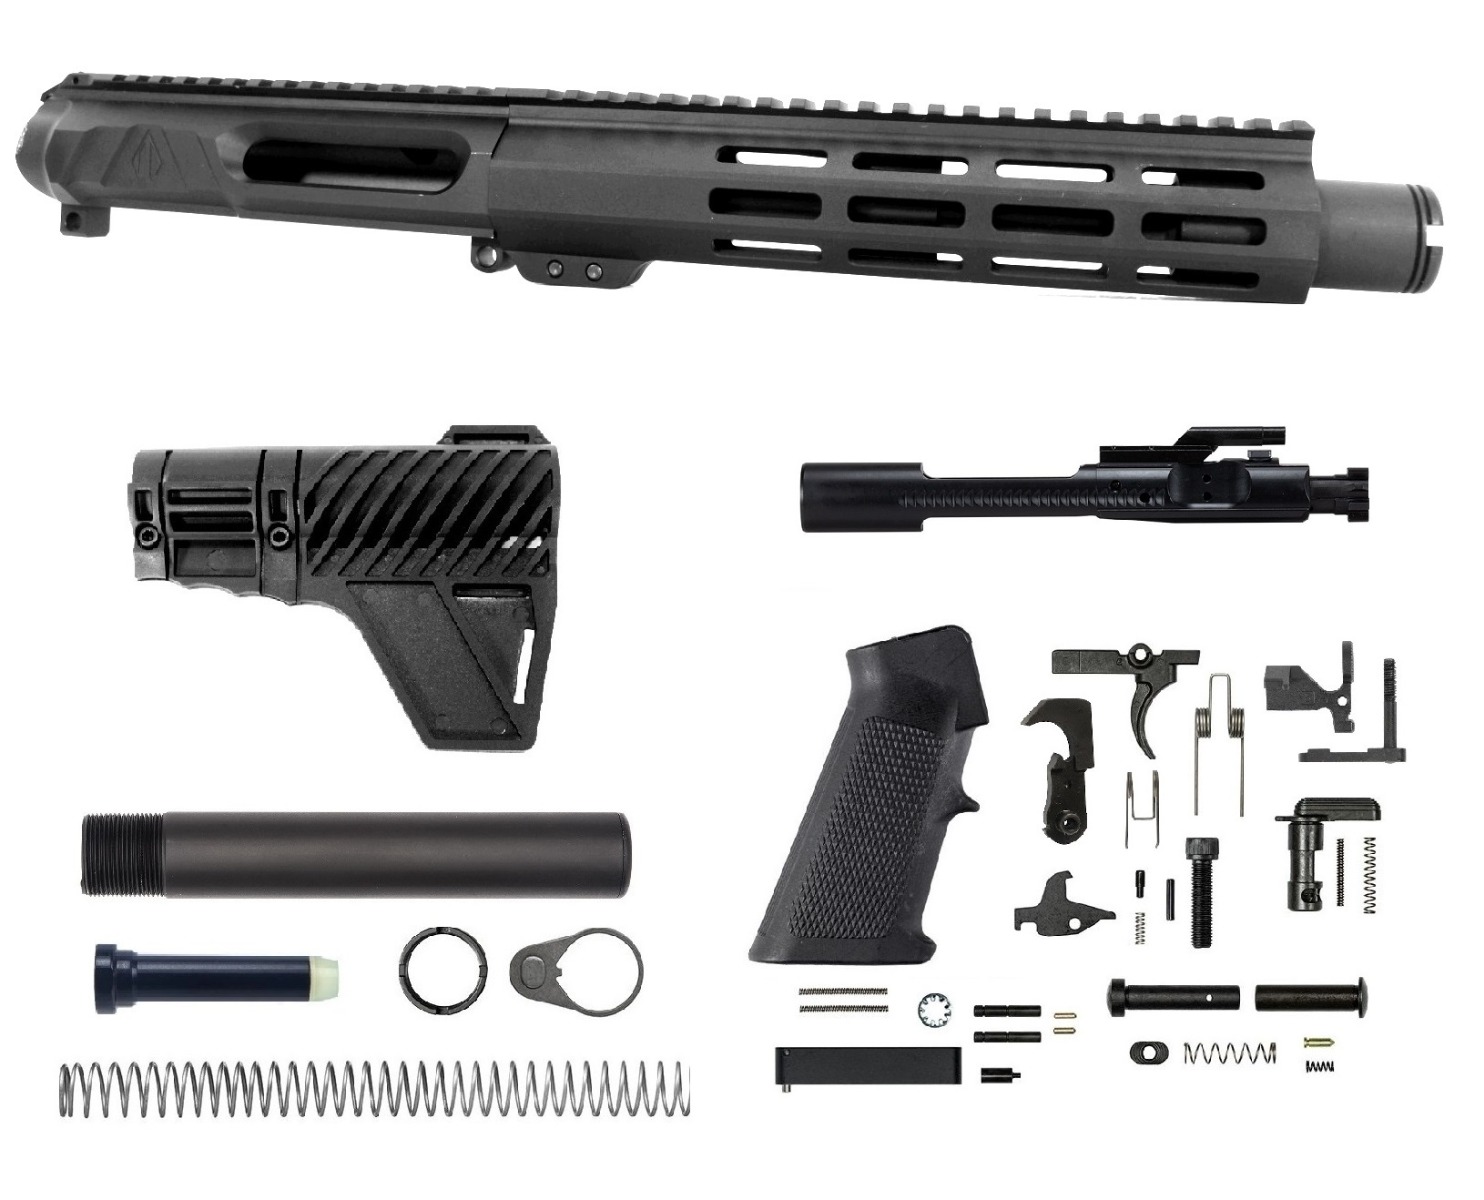 8 inch AR-15 NR Side Charging 5.56 NATO Melonite Upper w/Can Kit | Fast Shipping | Lifetime Warranty